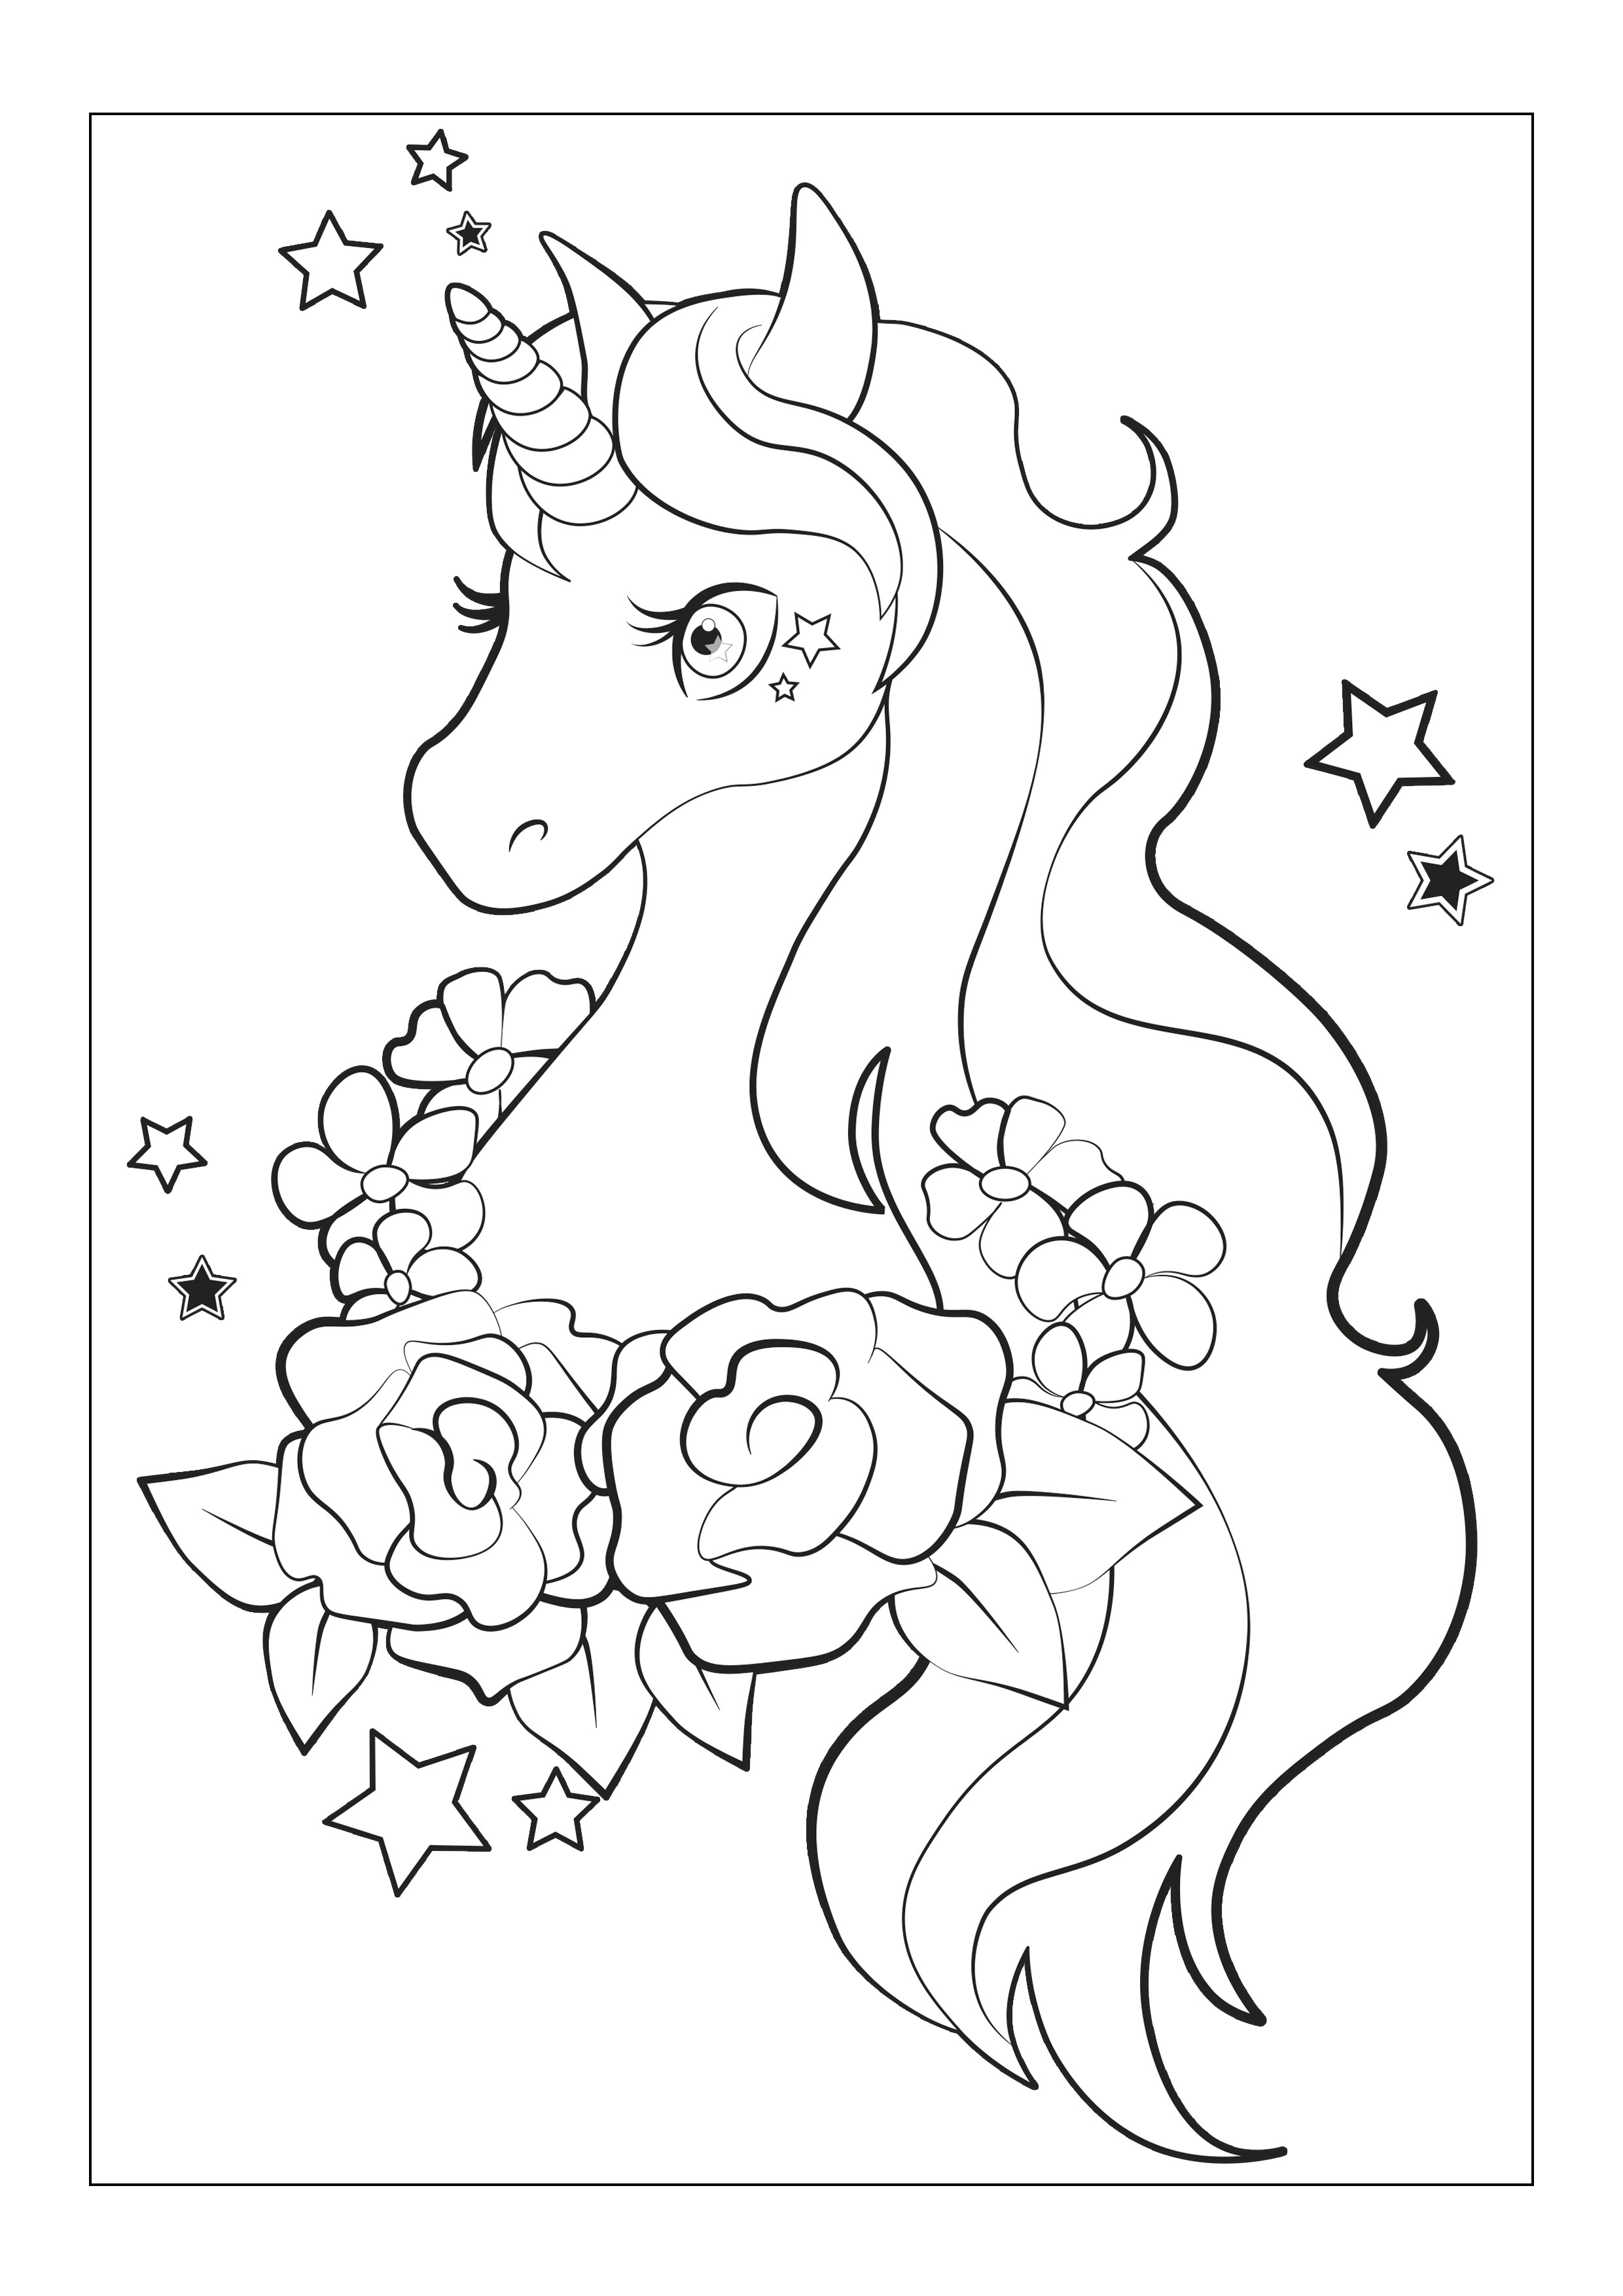 Free Coloring Books For Girls
 The Best Free Coloring Pages For Girls